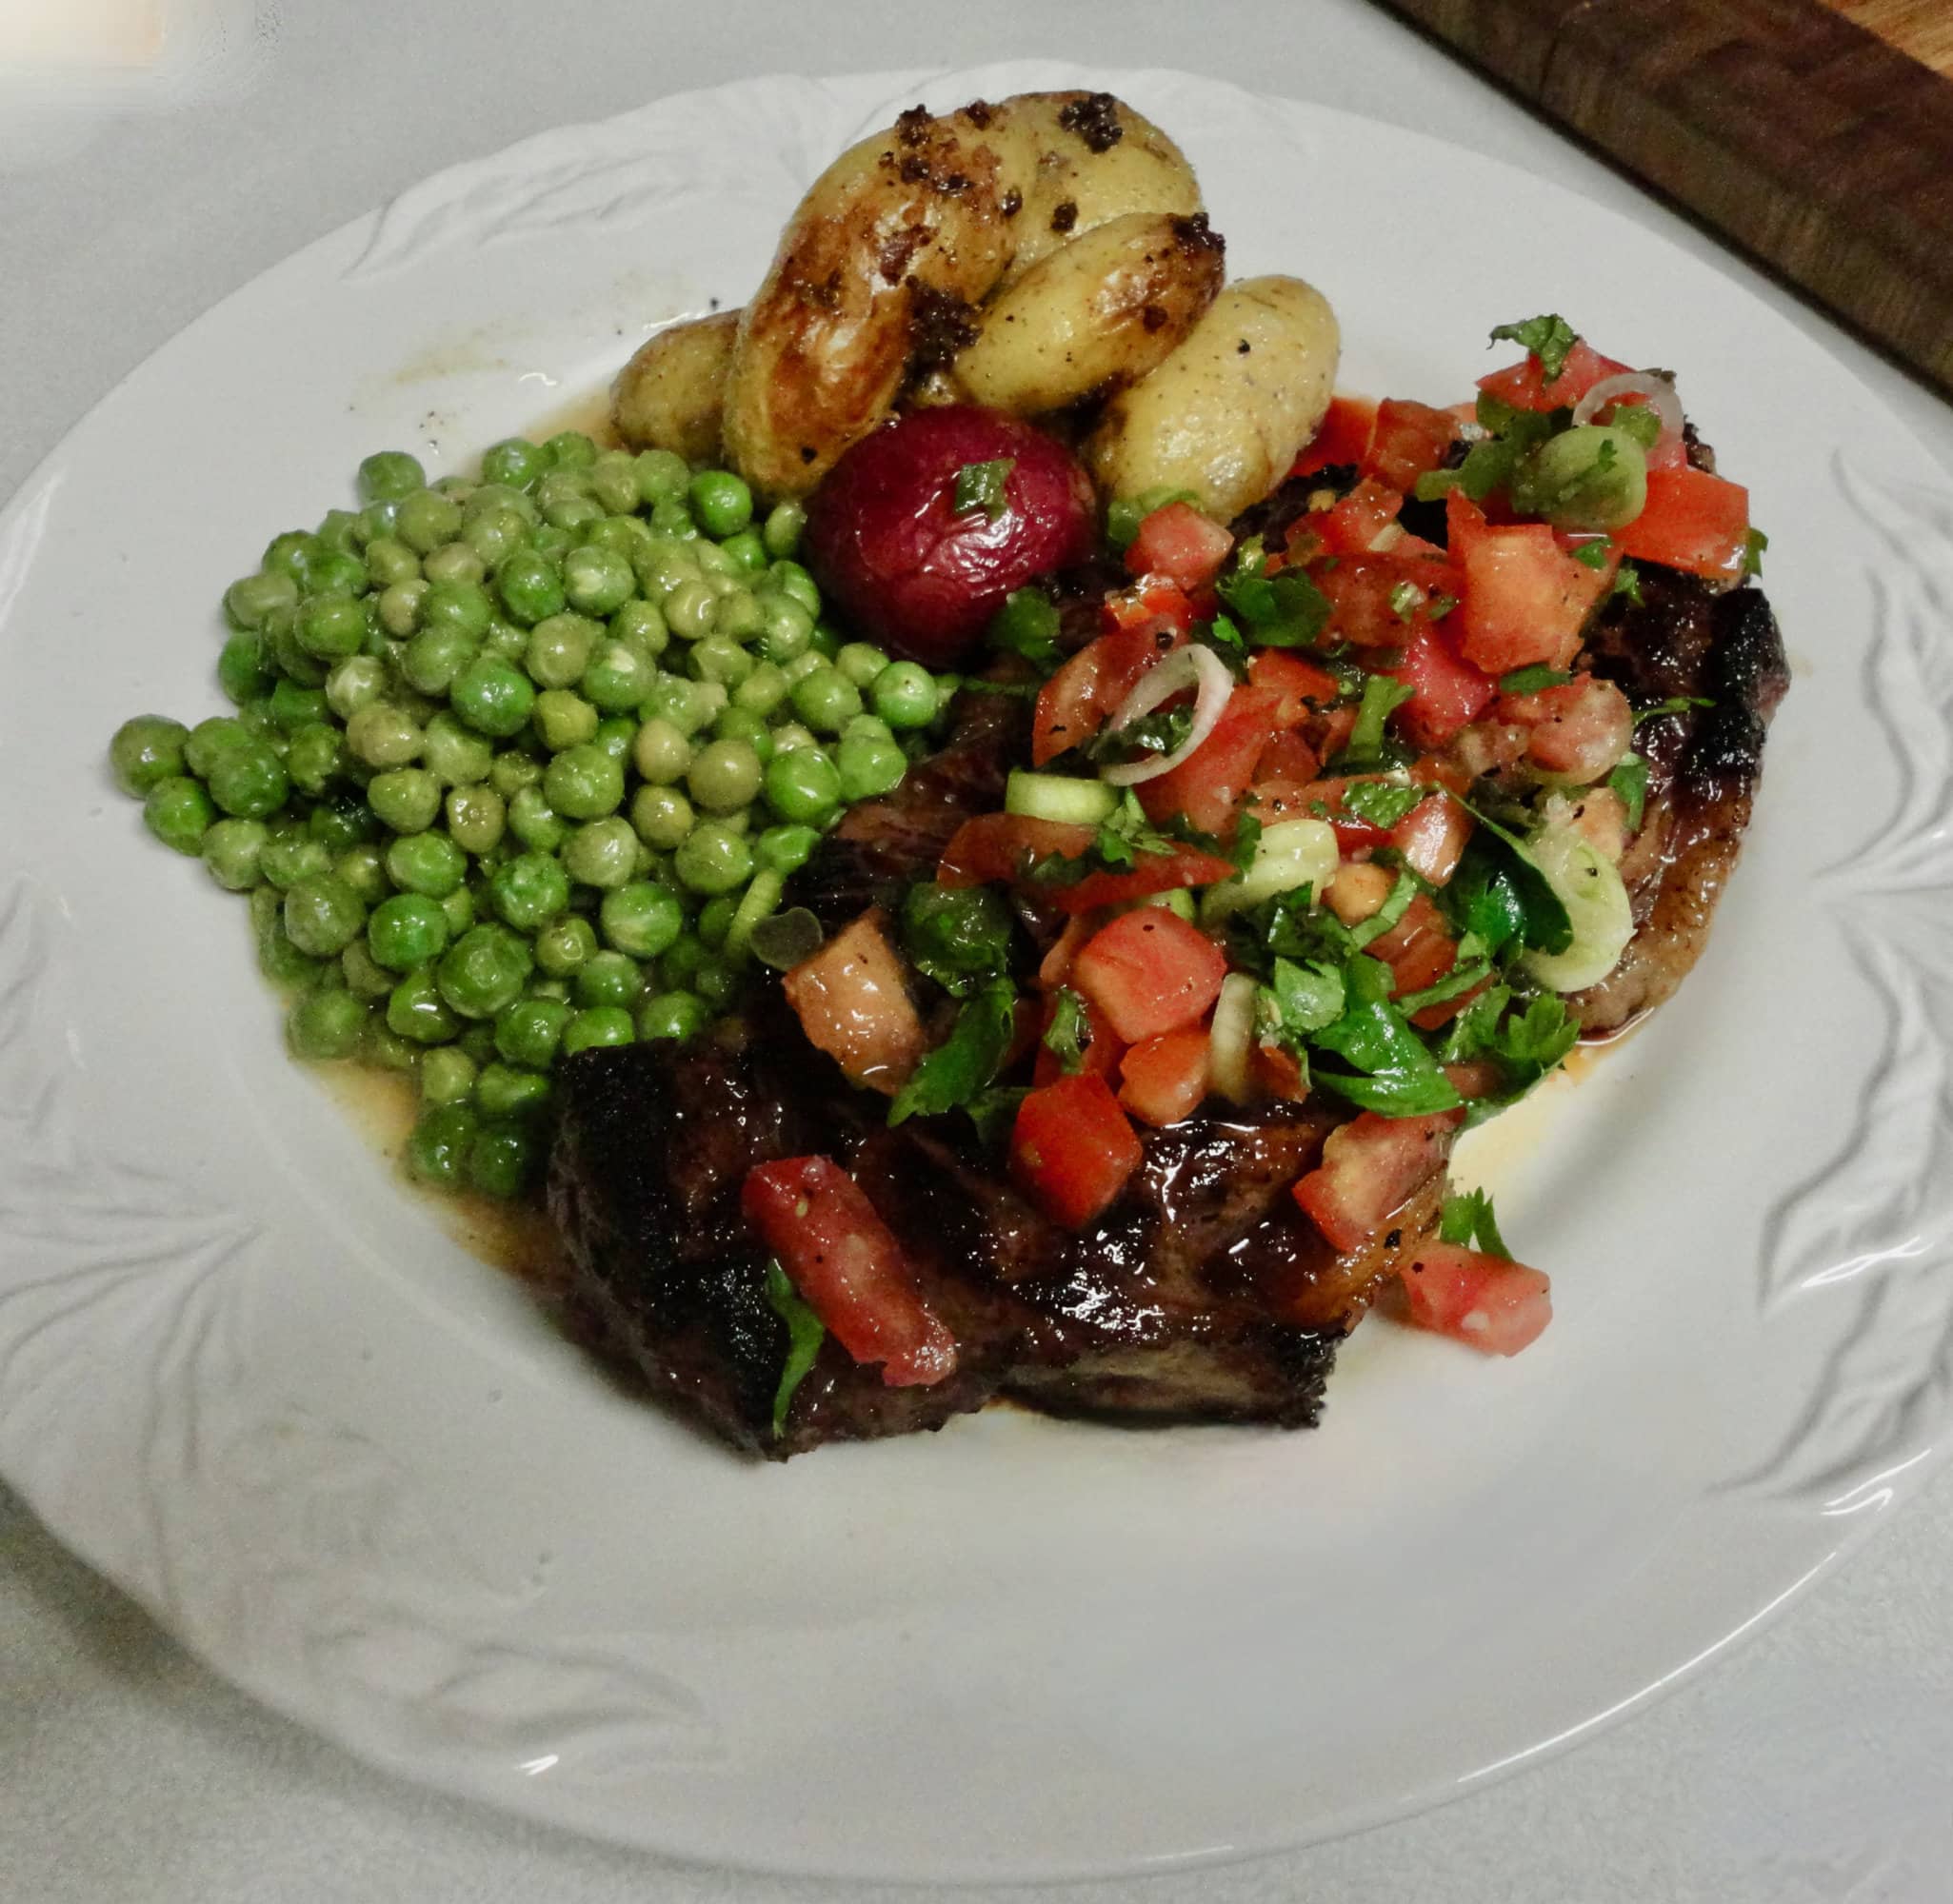 Jamie Oliver’s Steak with Herbed Salsa and Sweet English Peas